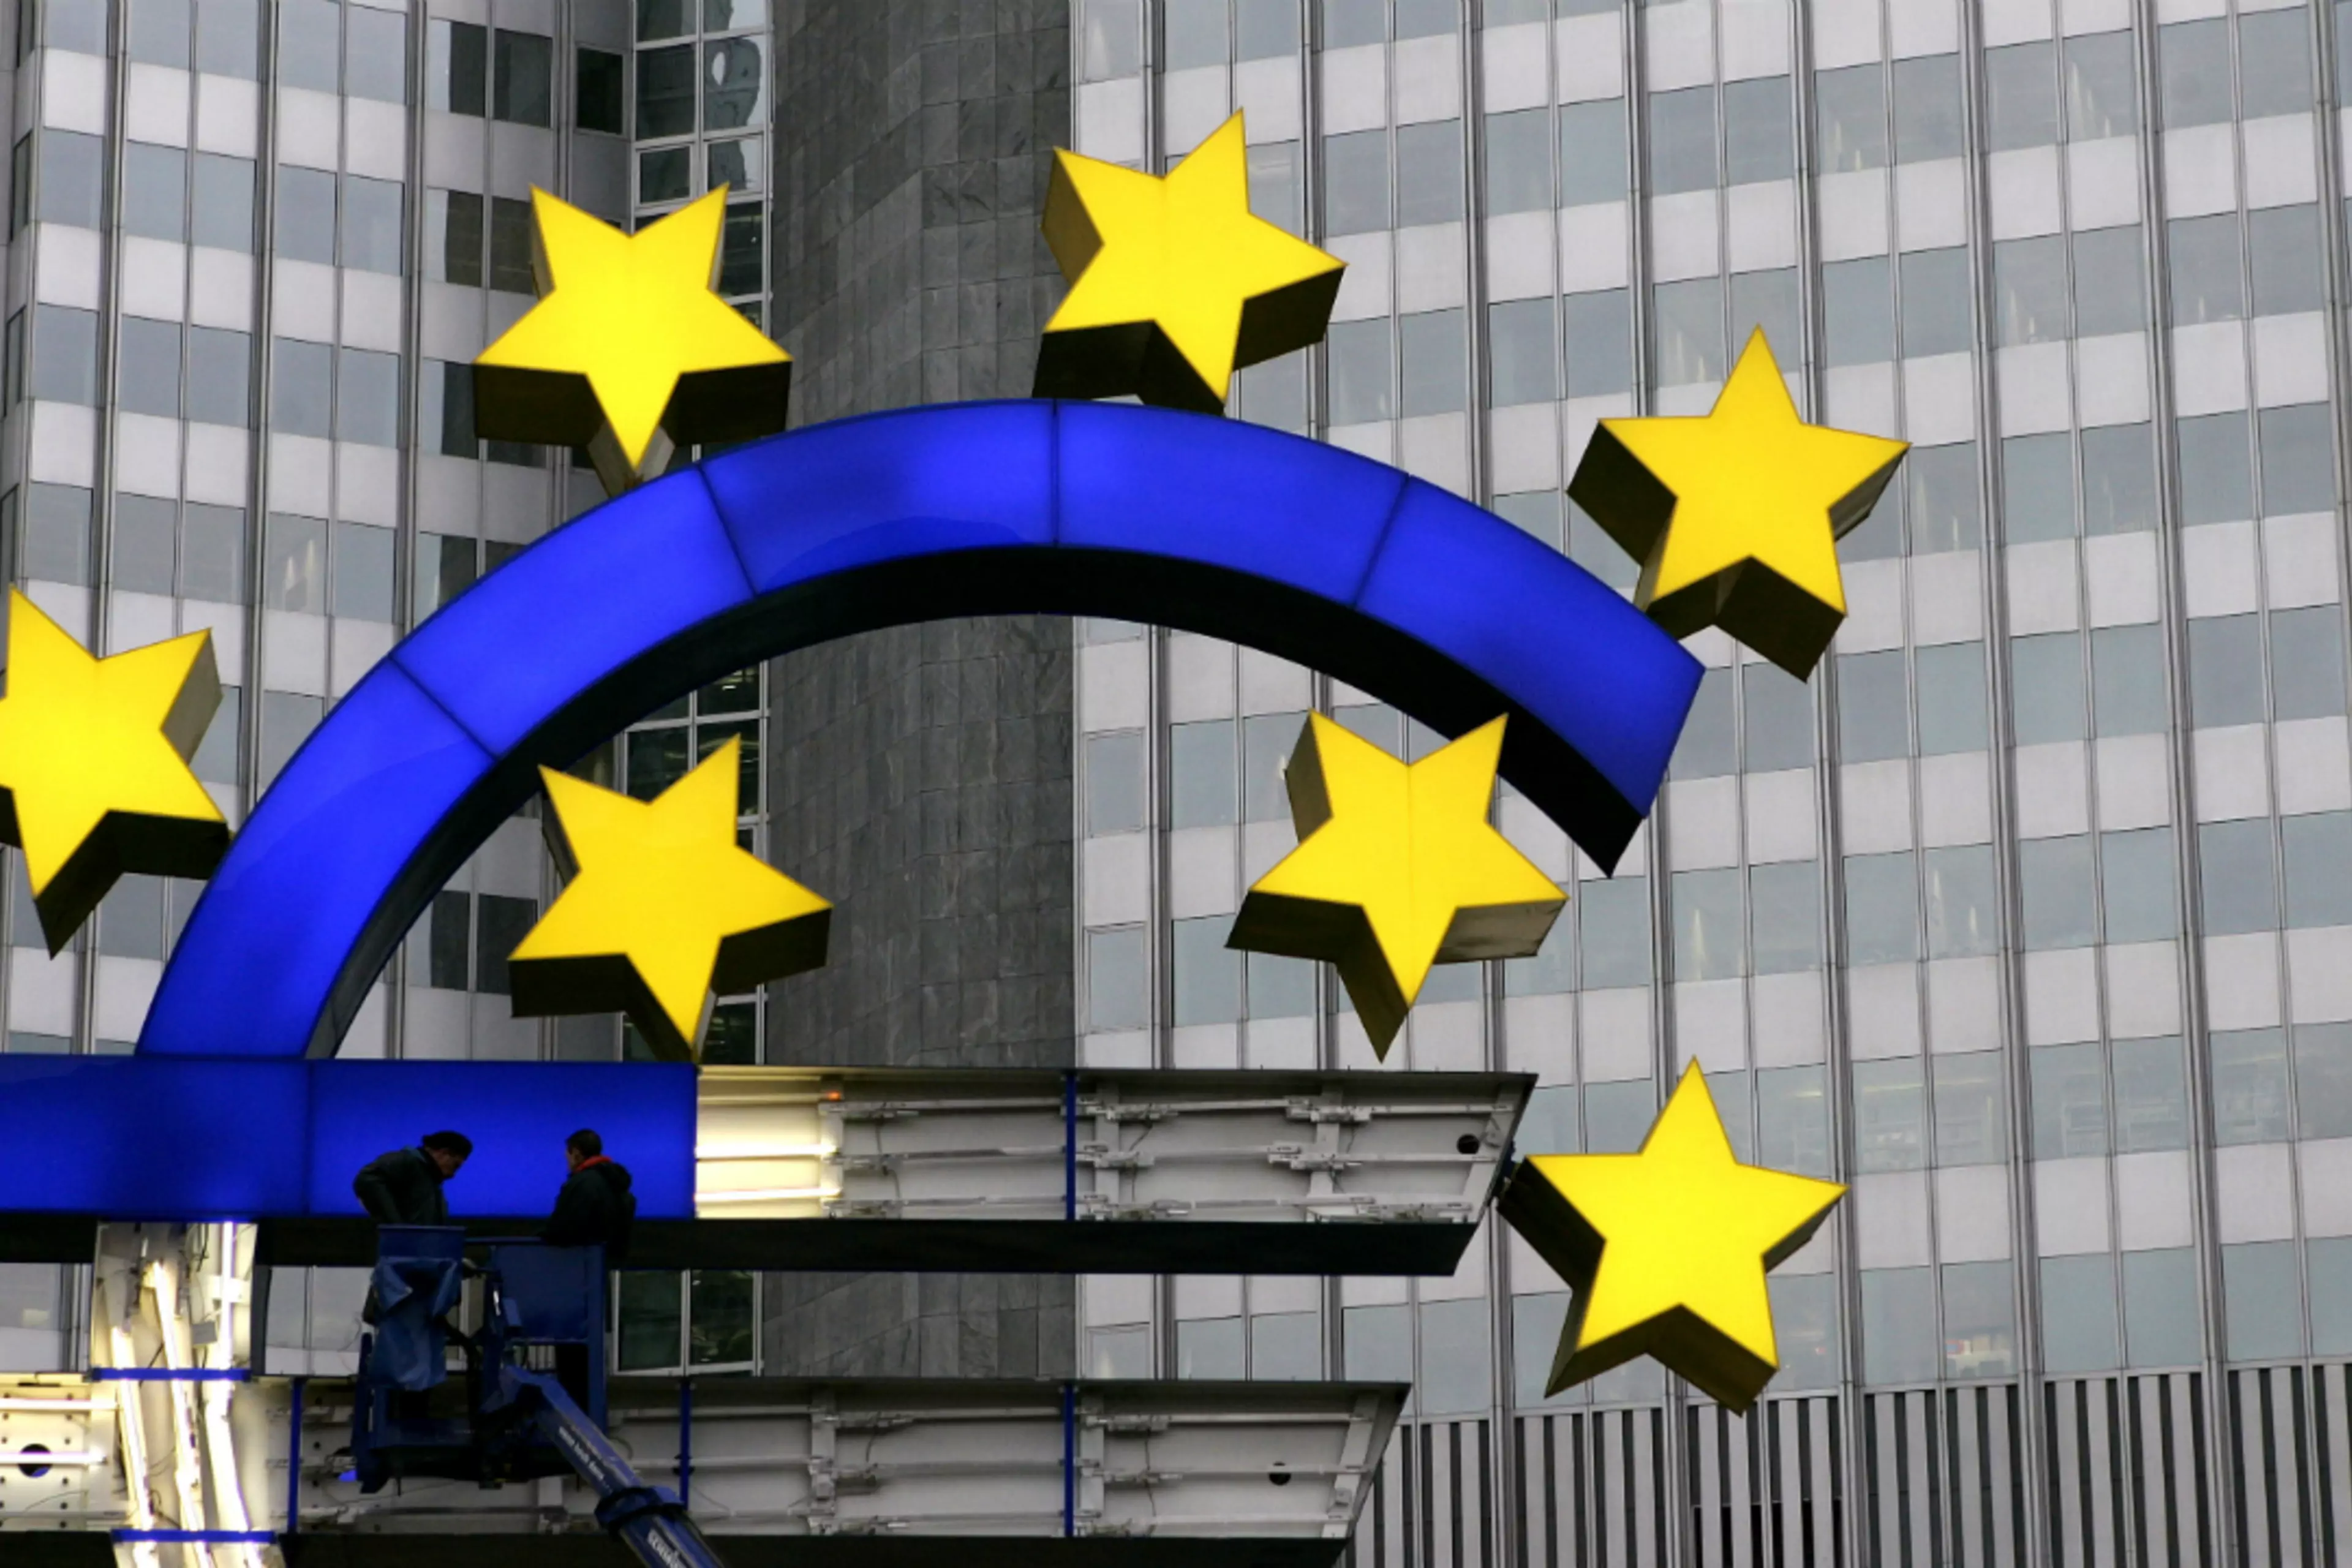 Workers repair the euro sign in front of the European Central Bank headquarters in Germany.